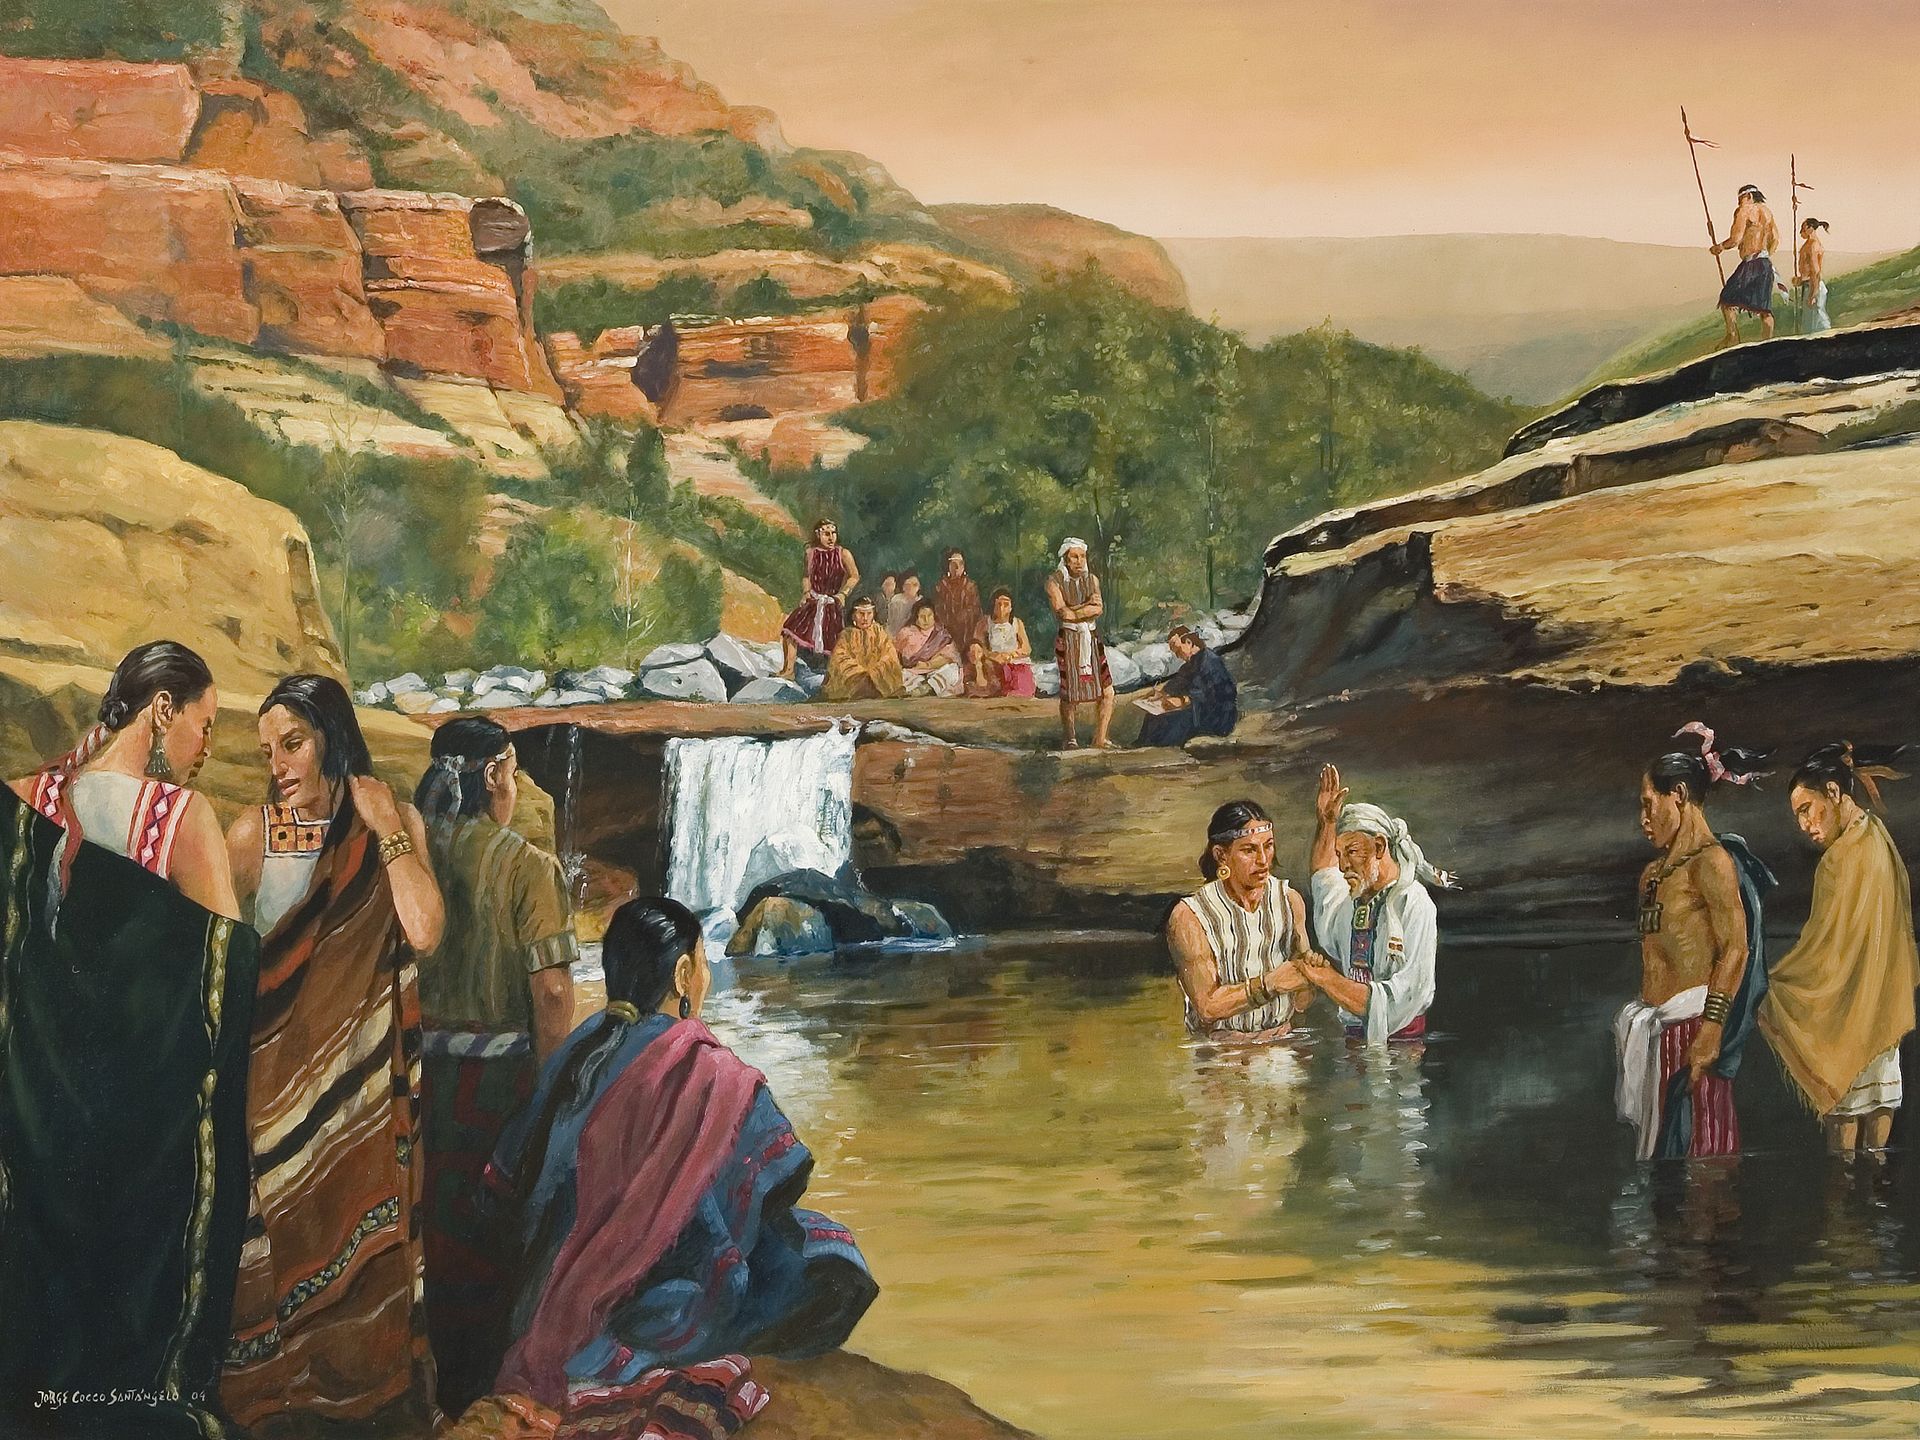 The Waters of Mormon, by Jorge Cocco